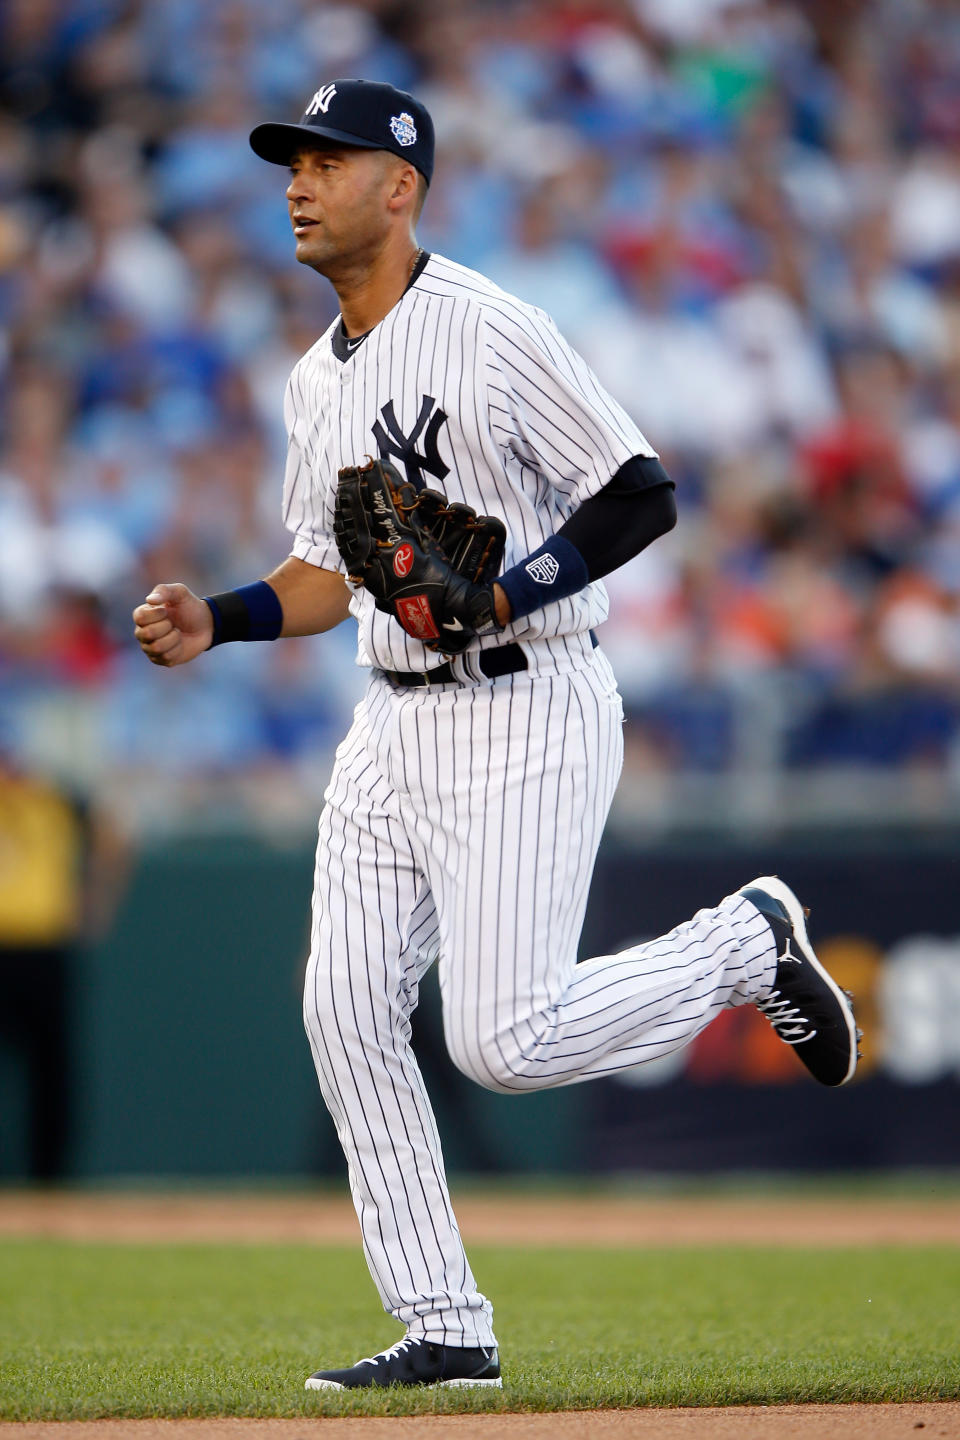 KANSAS CITY, MO - JULY 10: American League All-Star Derek Jeter #2 of the New York Yankees runs back to the dugout after the first inning during the 83rd MLB All-Star Game at Kauffman Stadium on July 10, 2012 in Kansas City, Missouri. (Photo by Jamie Squire/Getty Images)